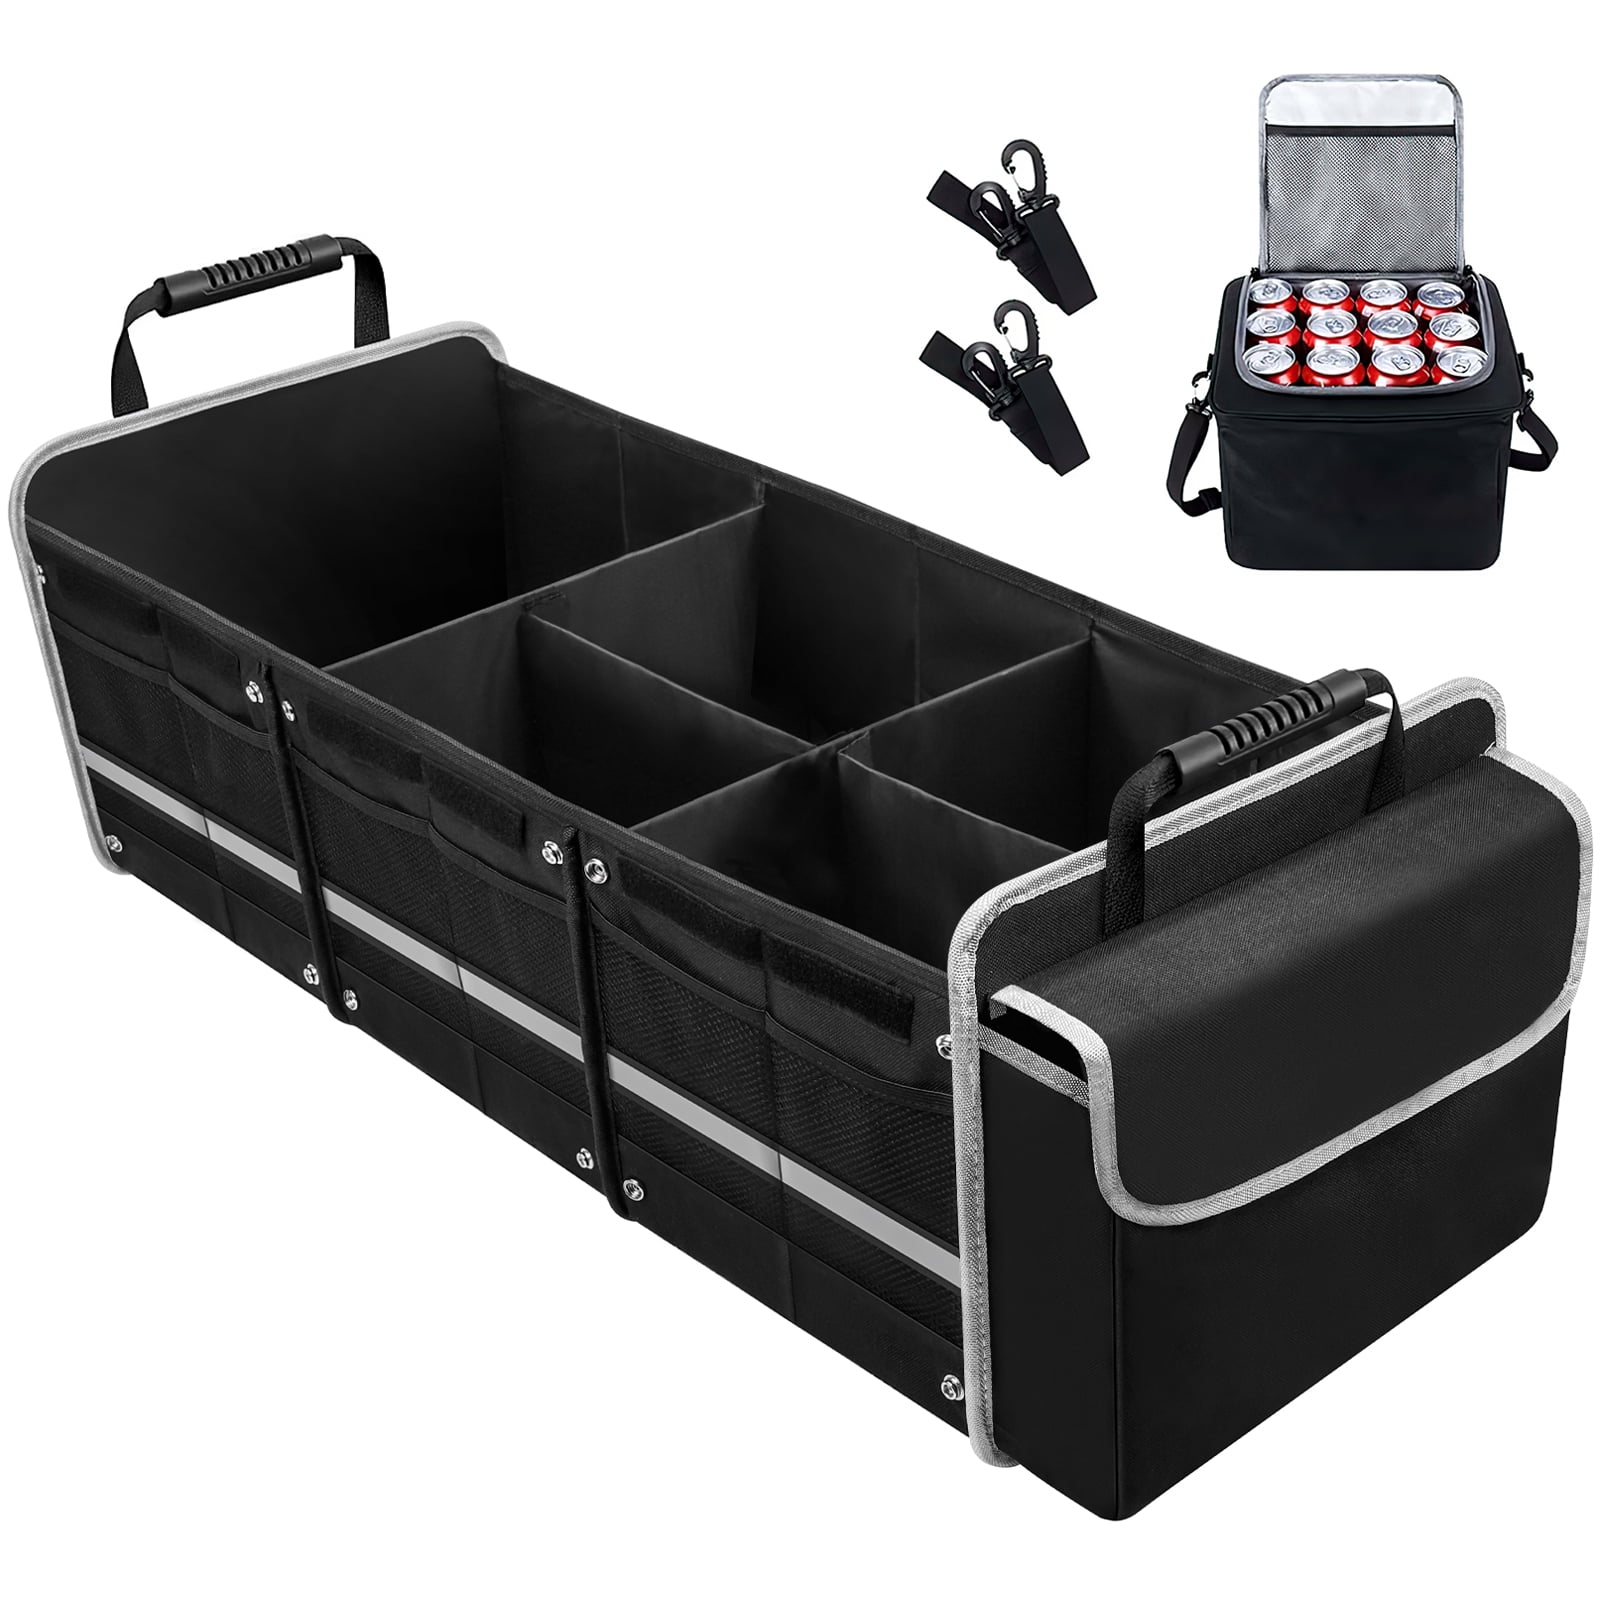 Trobo Trunk Organizer, Multipurpose Collapsible Car Storage Box With Insulated  Cooler Compartments, X-Large Leak-proof Auto Grocery Bag Holder For Hot Or Cold  Food, Truck, Van, SUV, Travel Accessories 